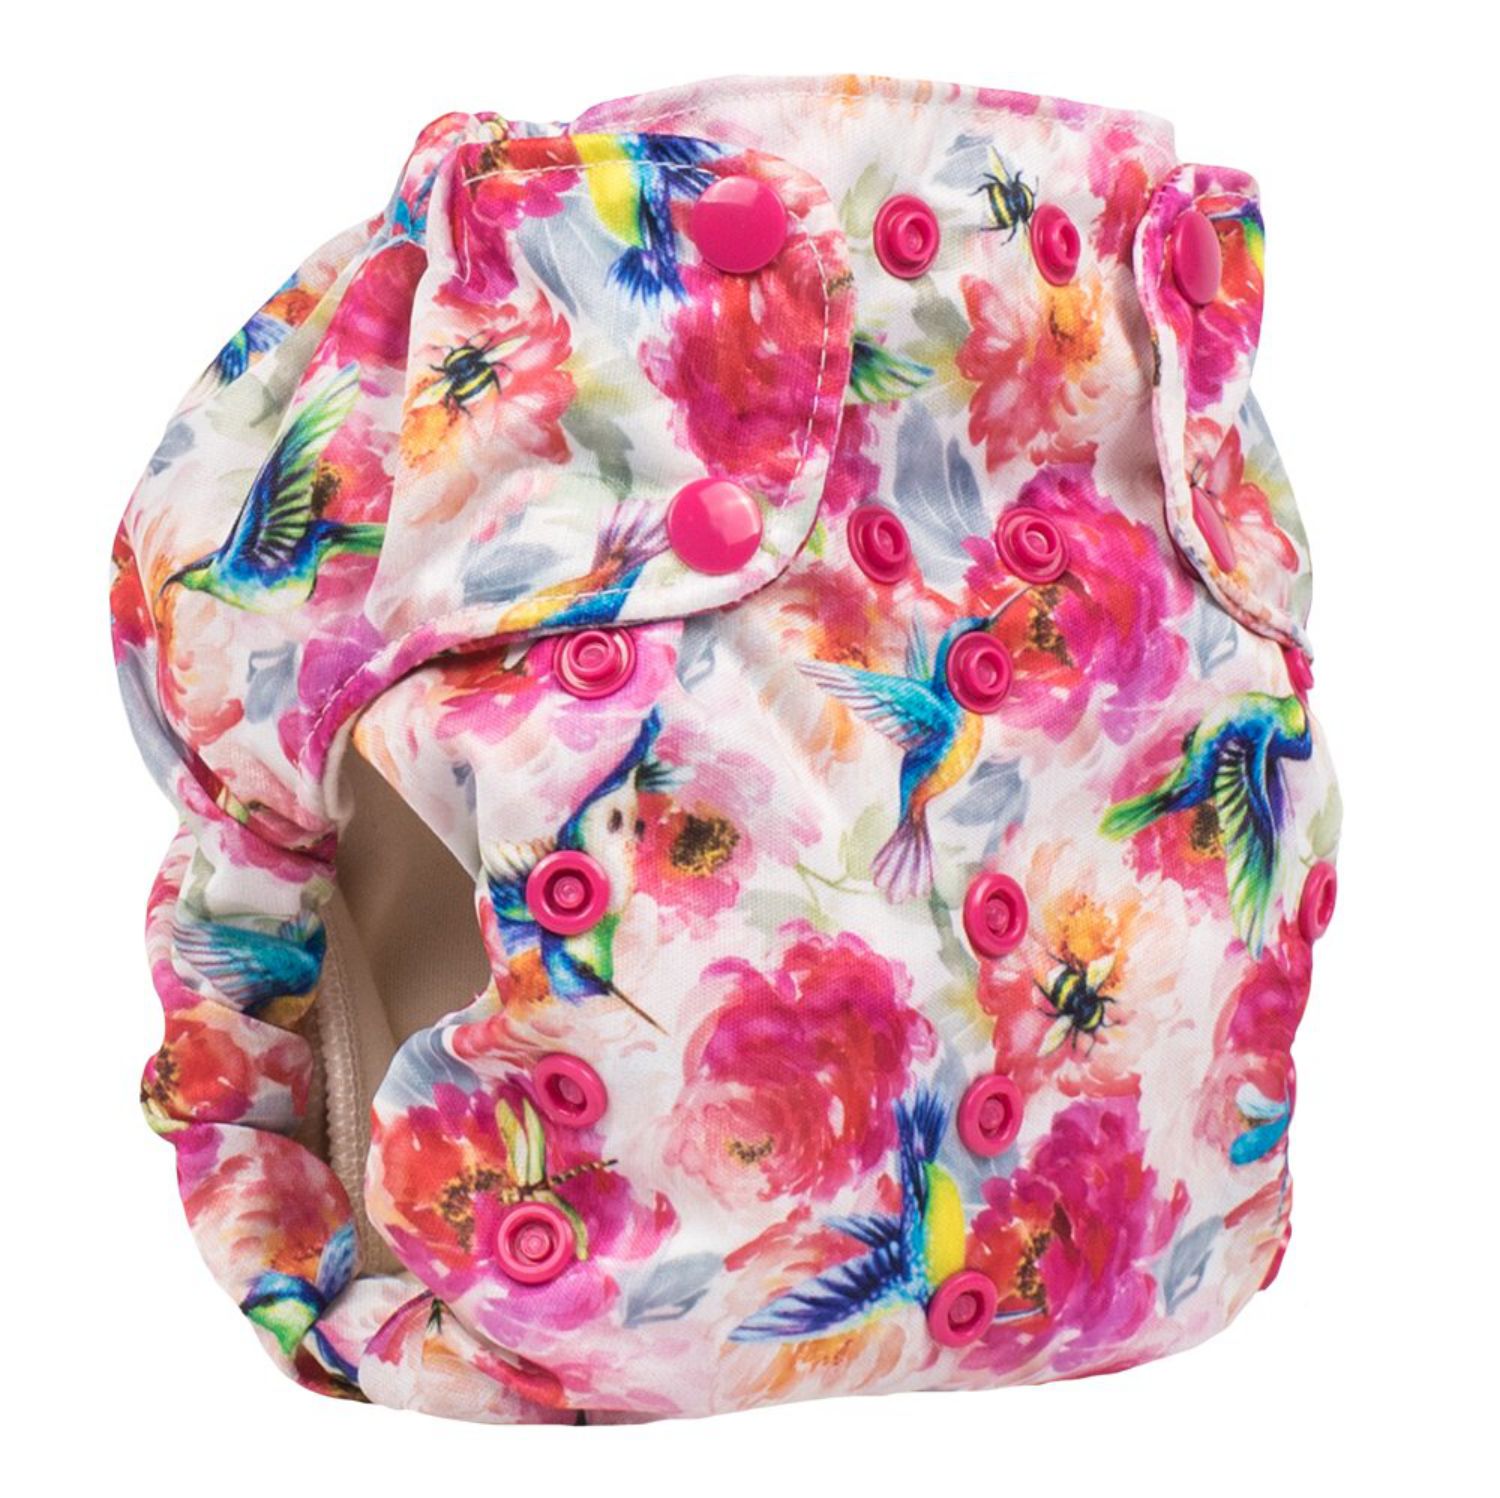 Smart Bottoms 3.1 One Size All-in-One nappy Pattern: Shimmer